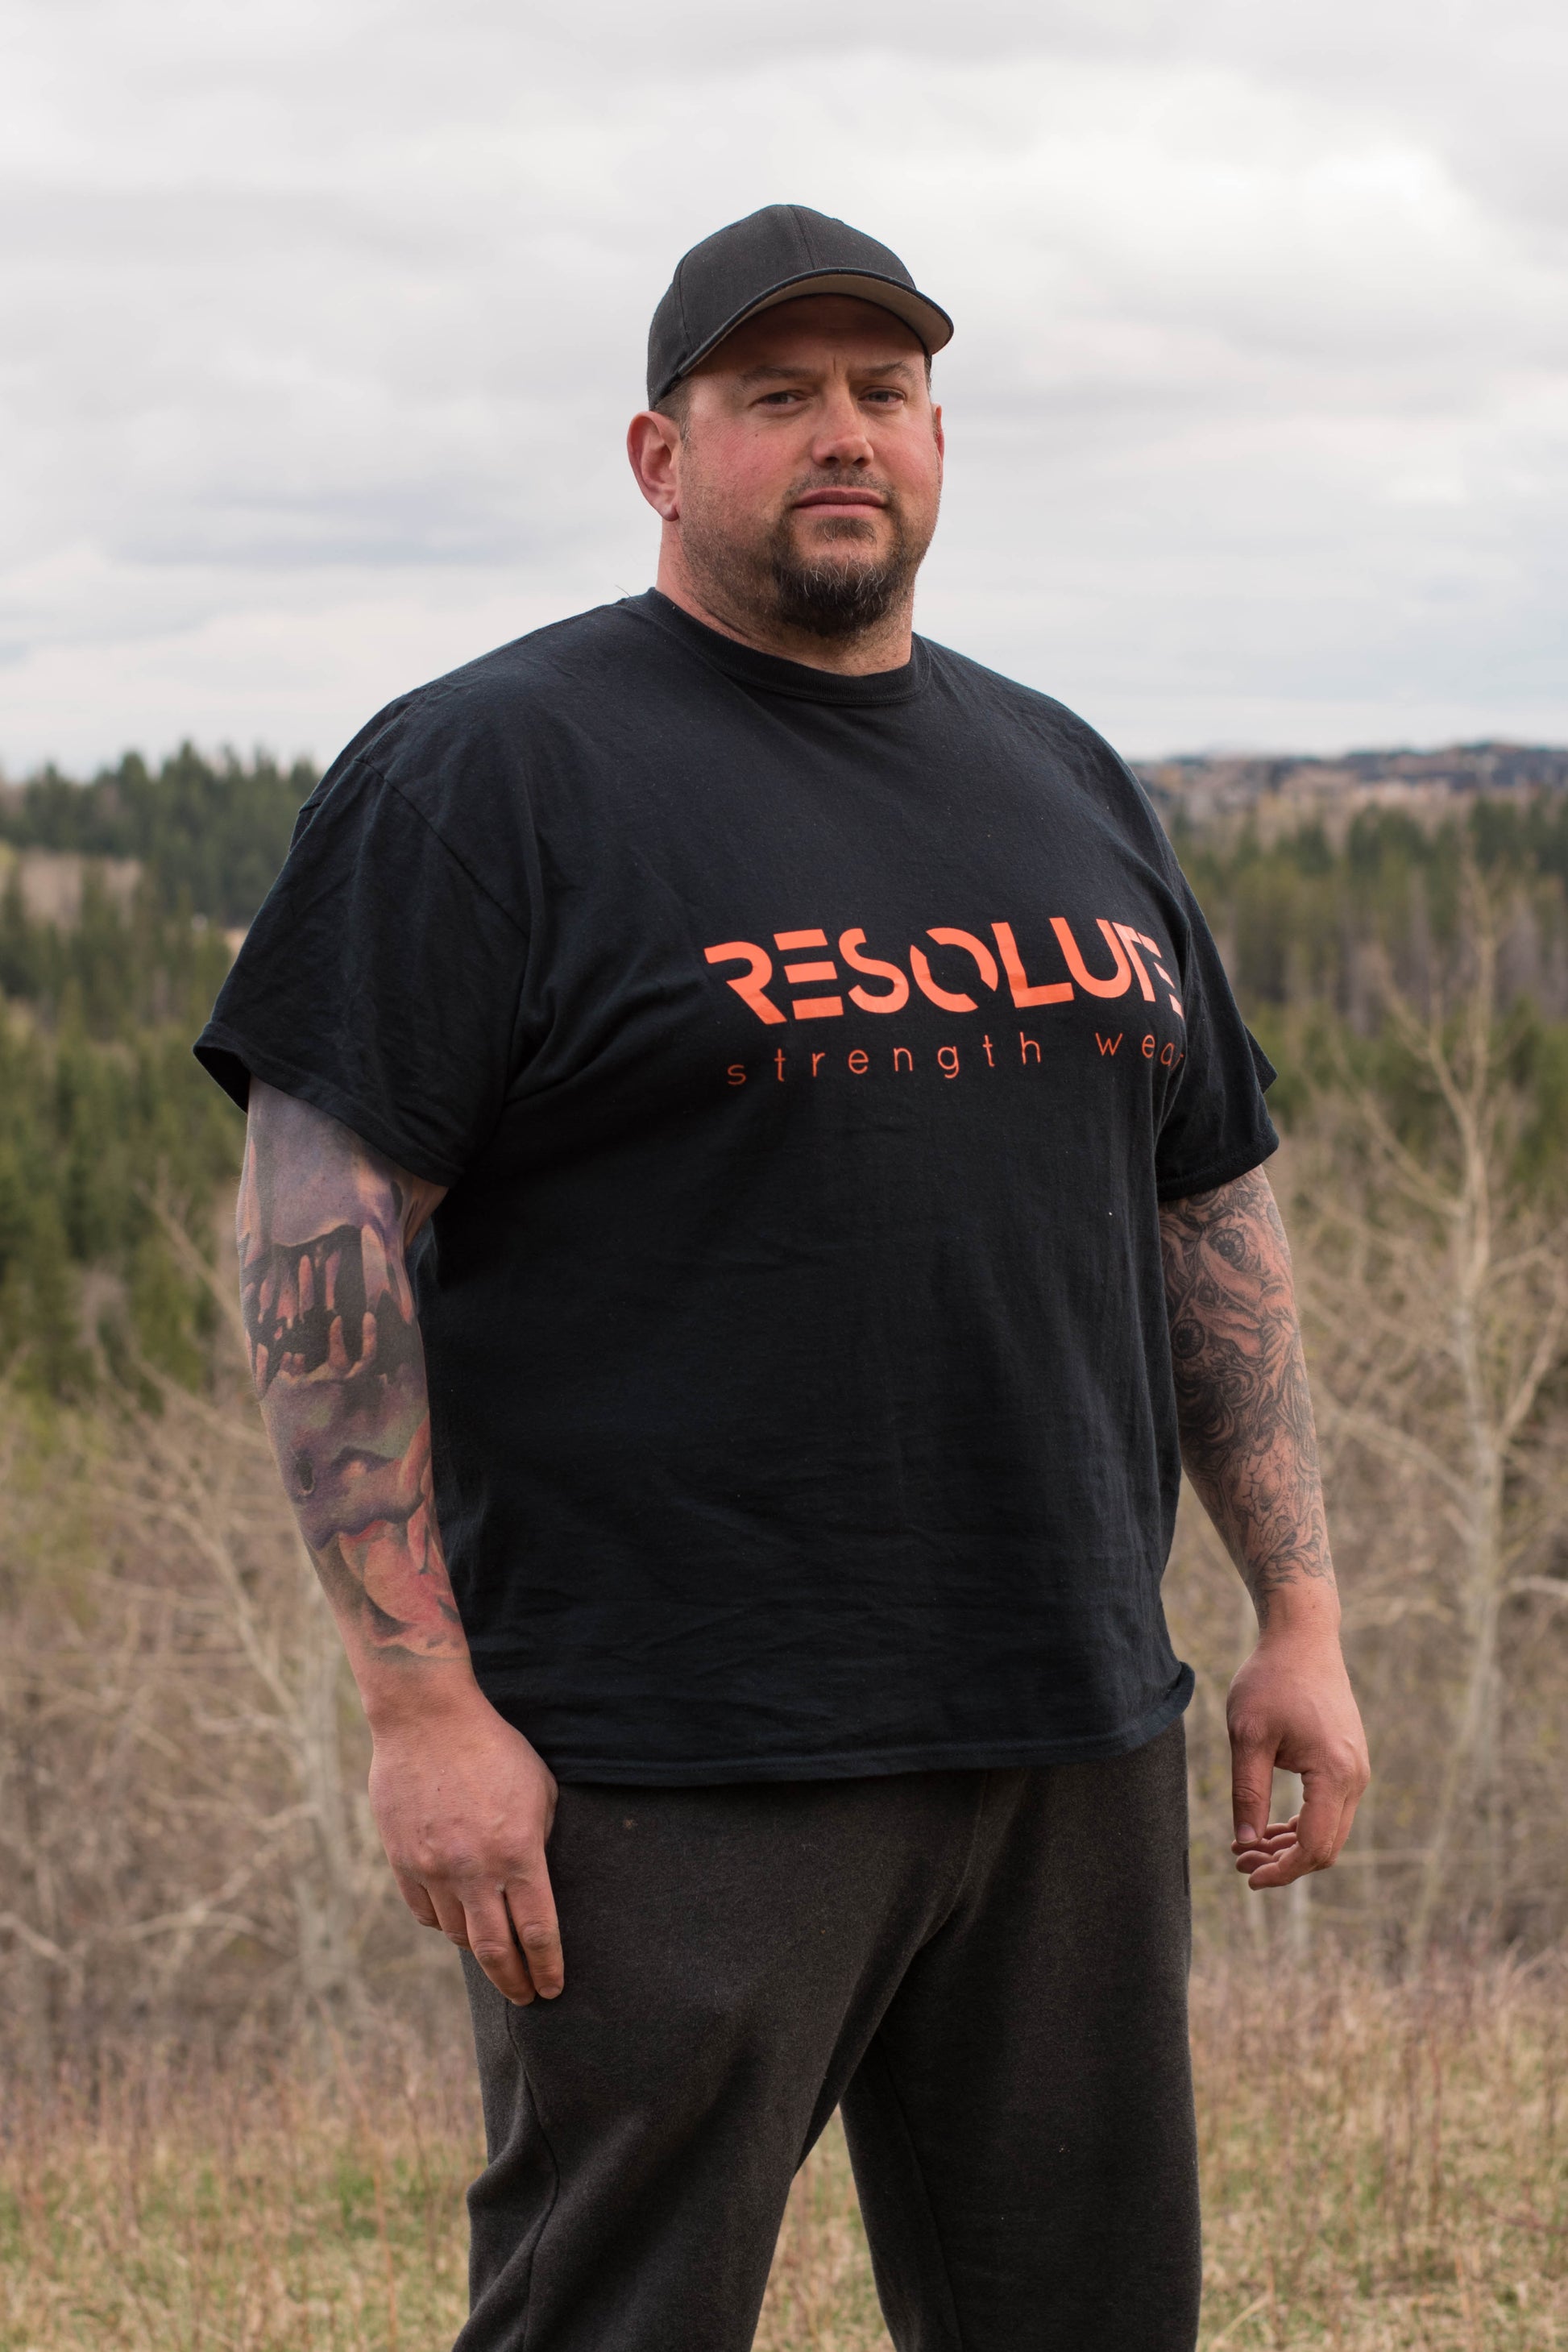 The Classic - Black - Resolute Strength Wear